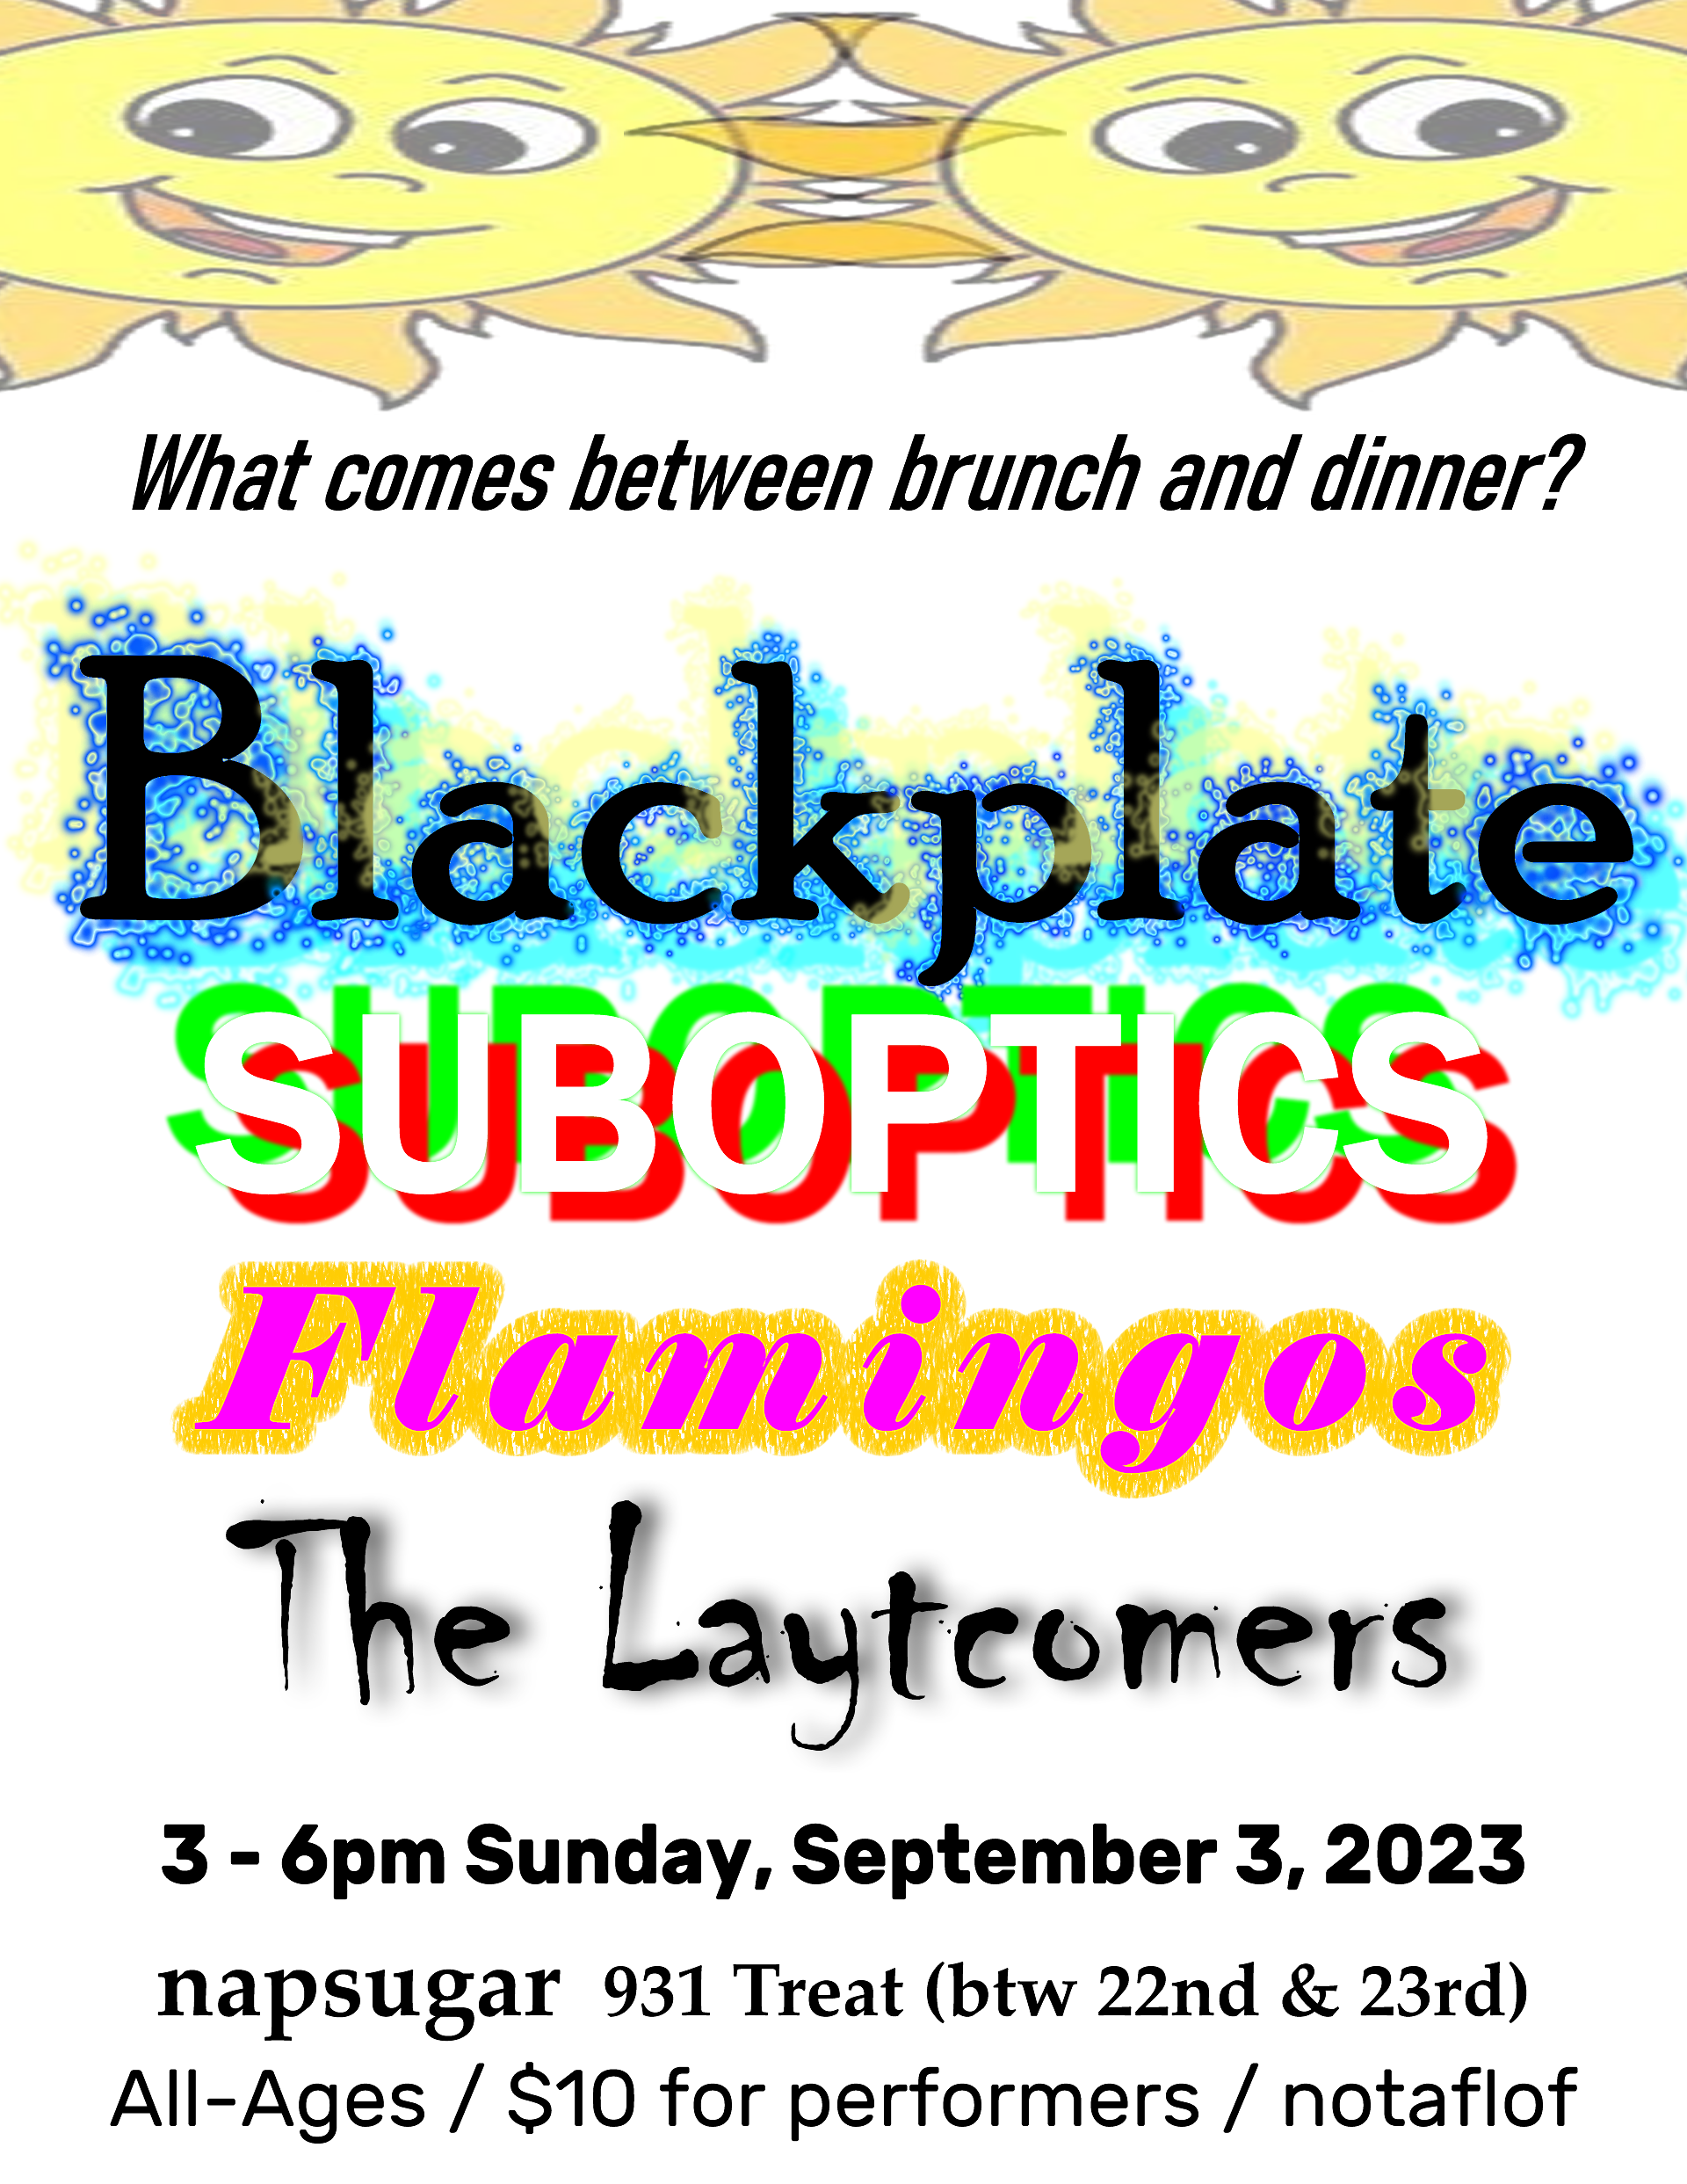 A flyer with white background in black text it asks the question - What comes between brunch and dinner? and colorful text lists the performer's names and 2 orange and yellow cartoon suns at the top. The text incorporated into the image is transcribed below